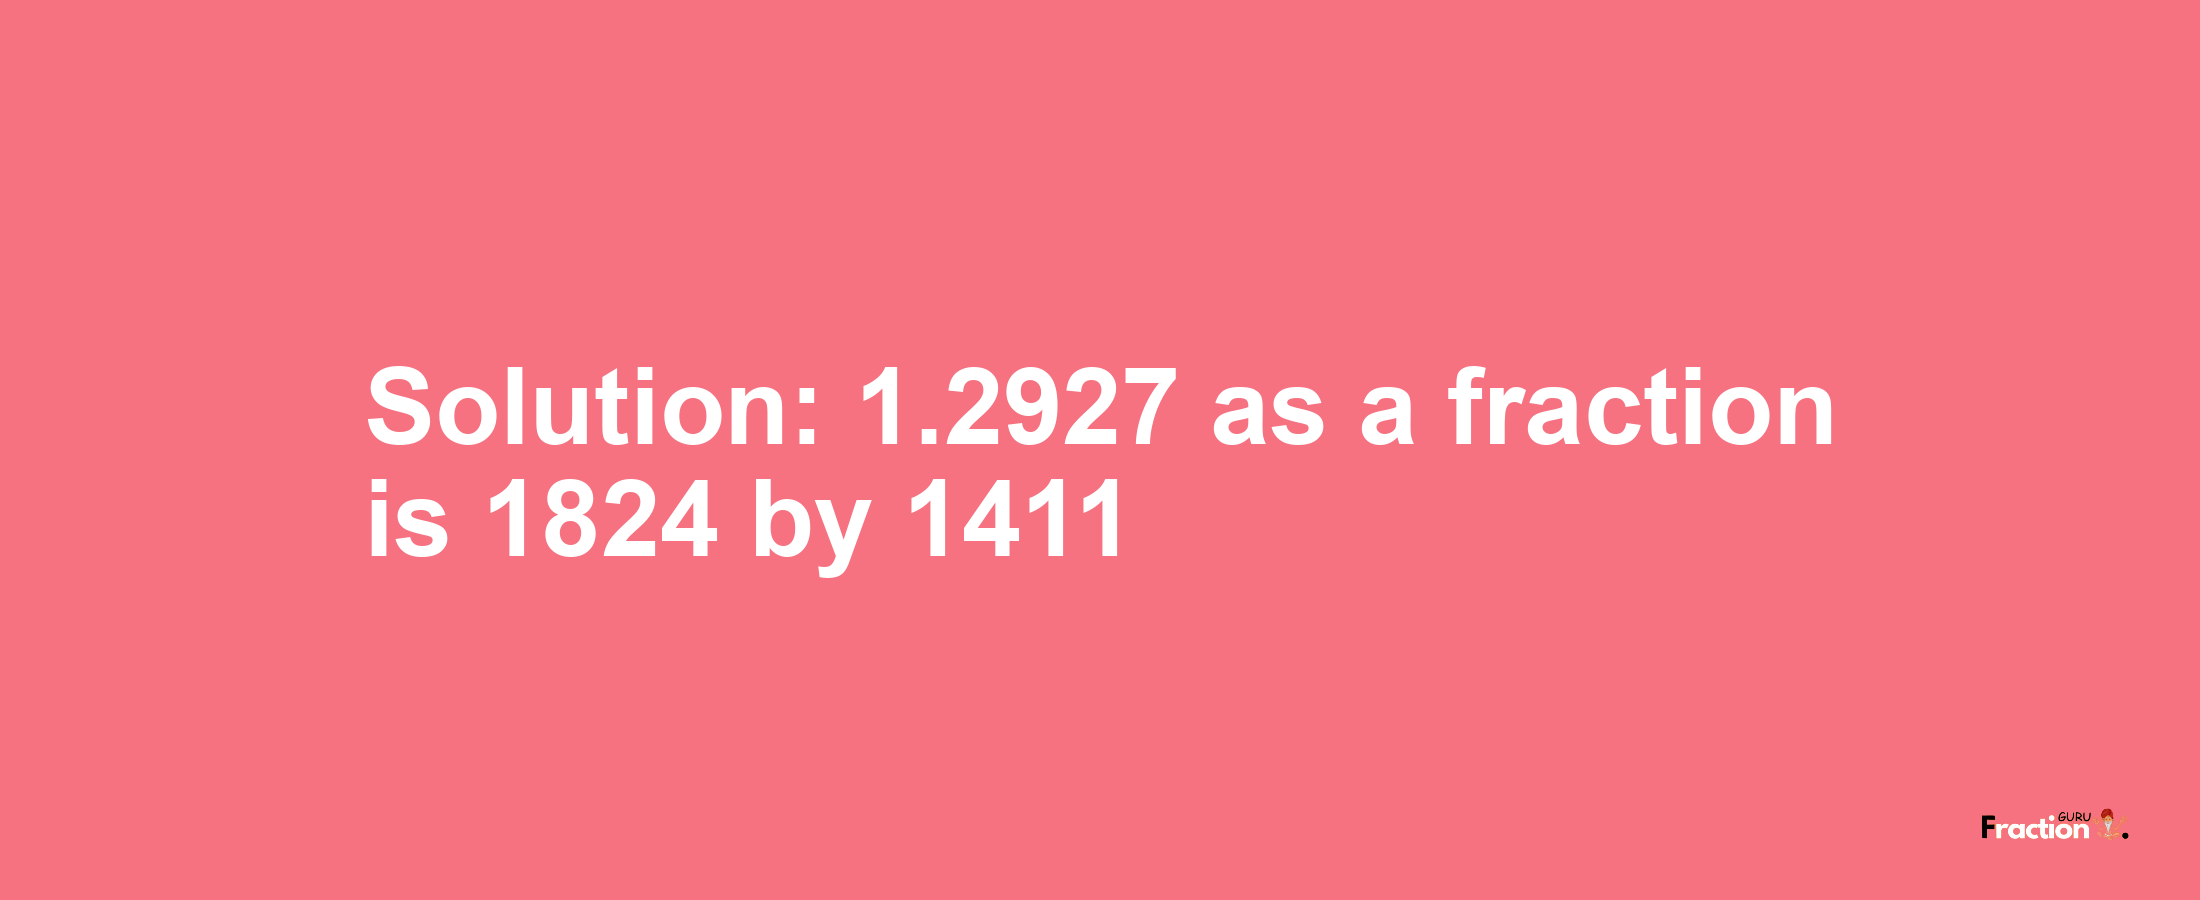 Solution:1.2927 as a fraction is 1824/1411